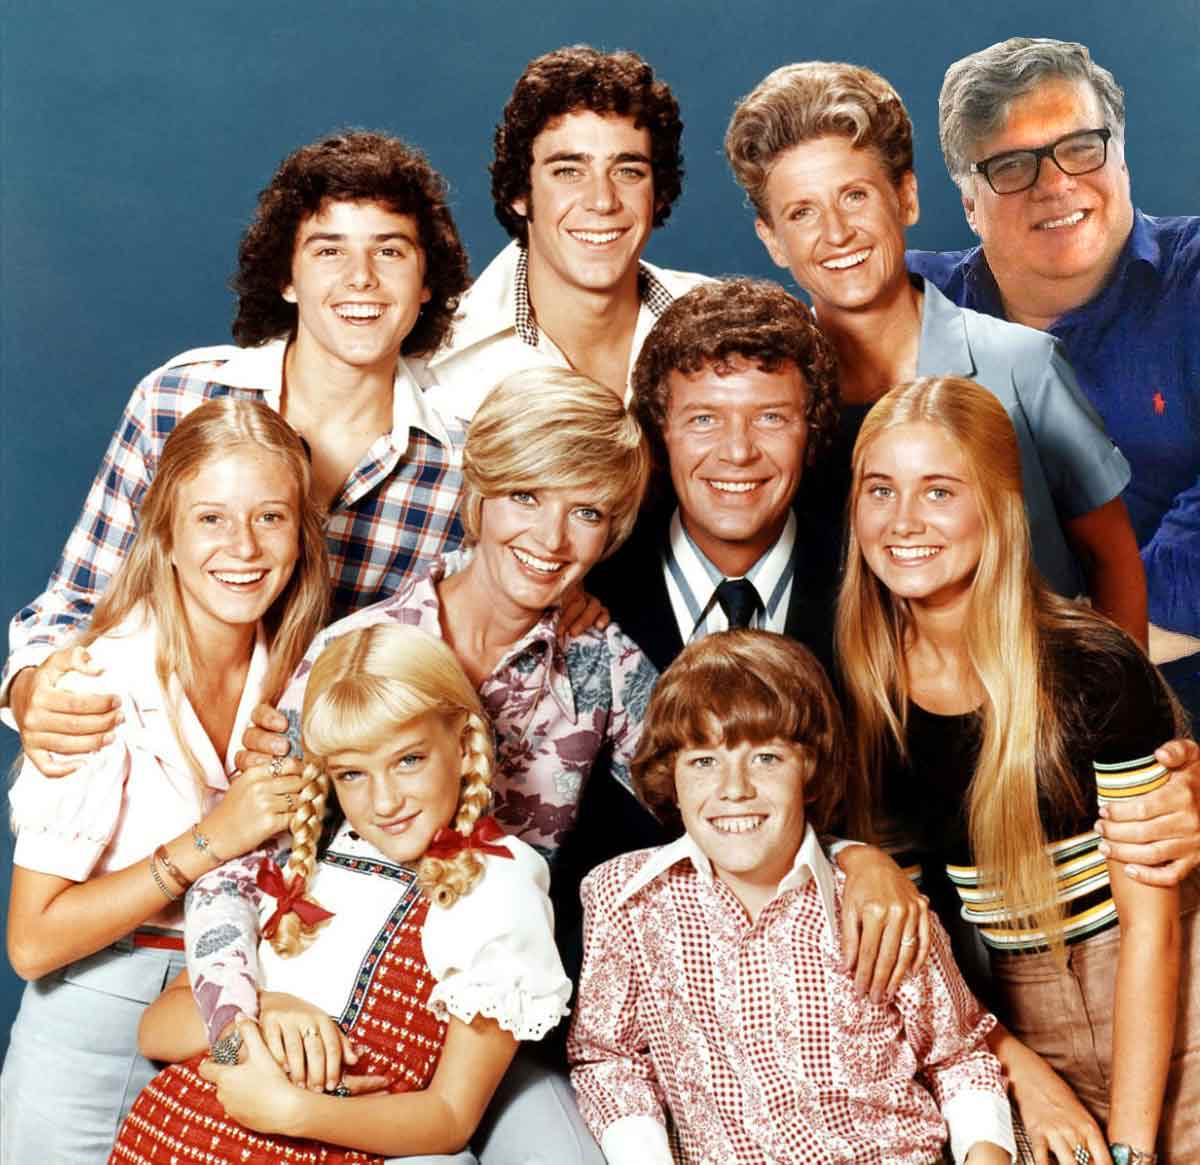 Color photo of the Brady Brunch family with David inserted on the right hand side.